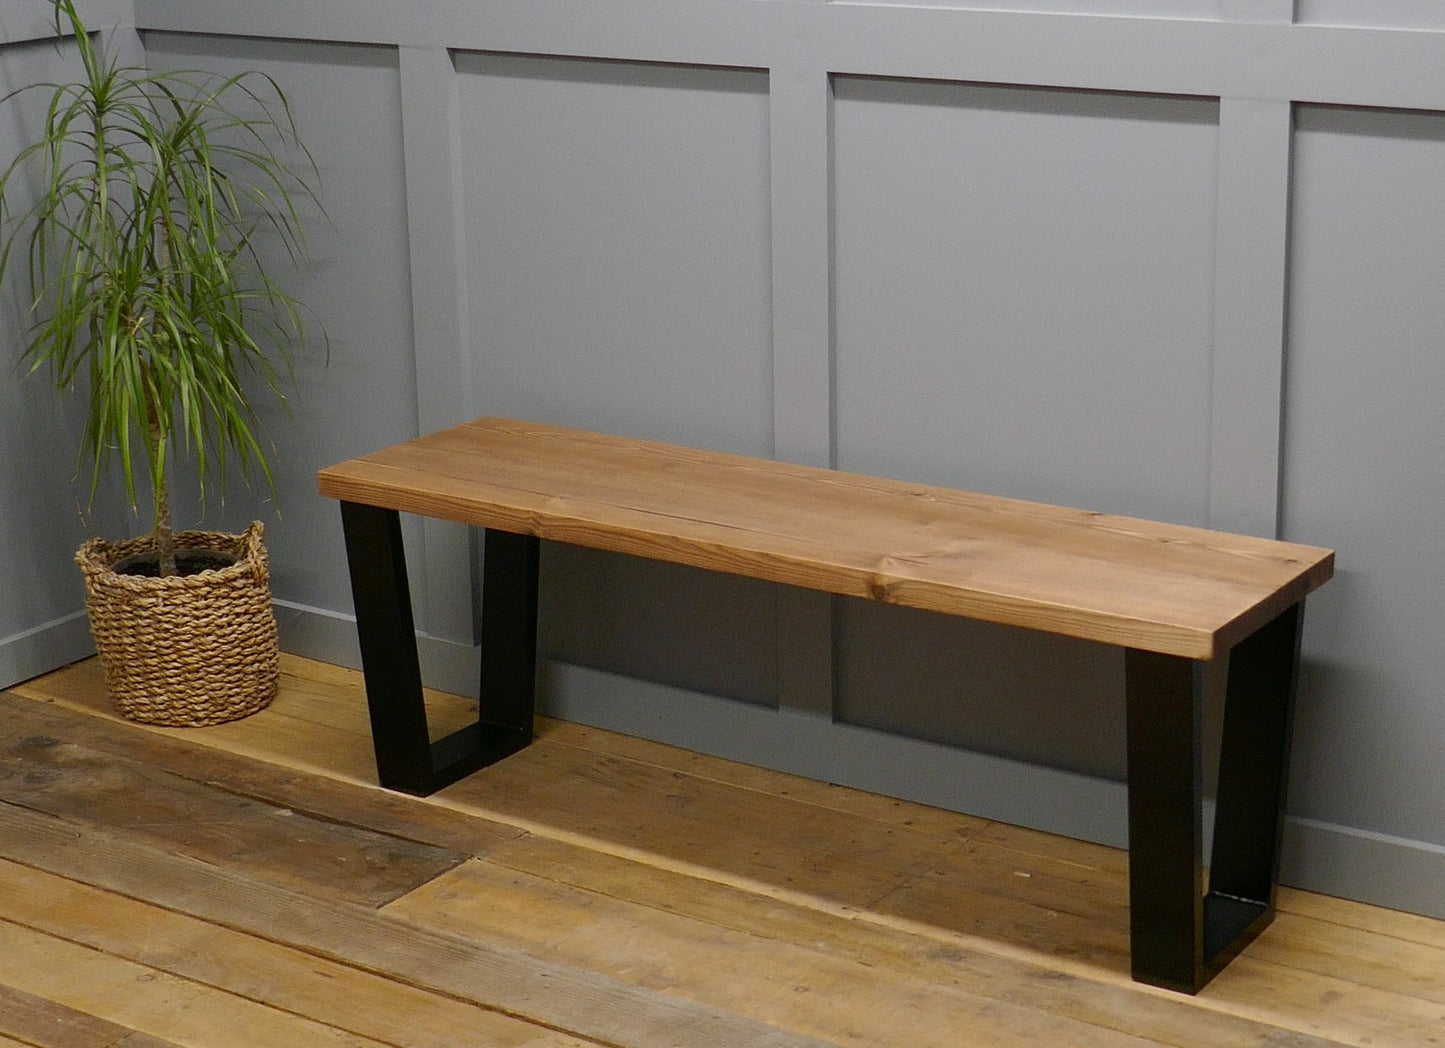 Rustic Solid Wood Industrial Dining Table Bench Set With Black V-Frame Legs